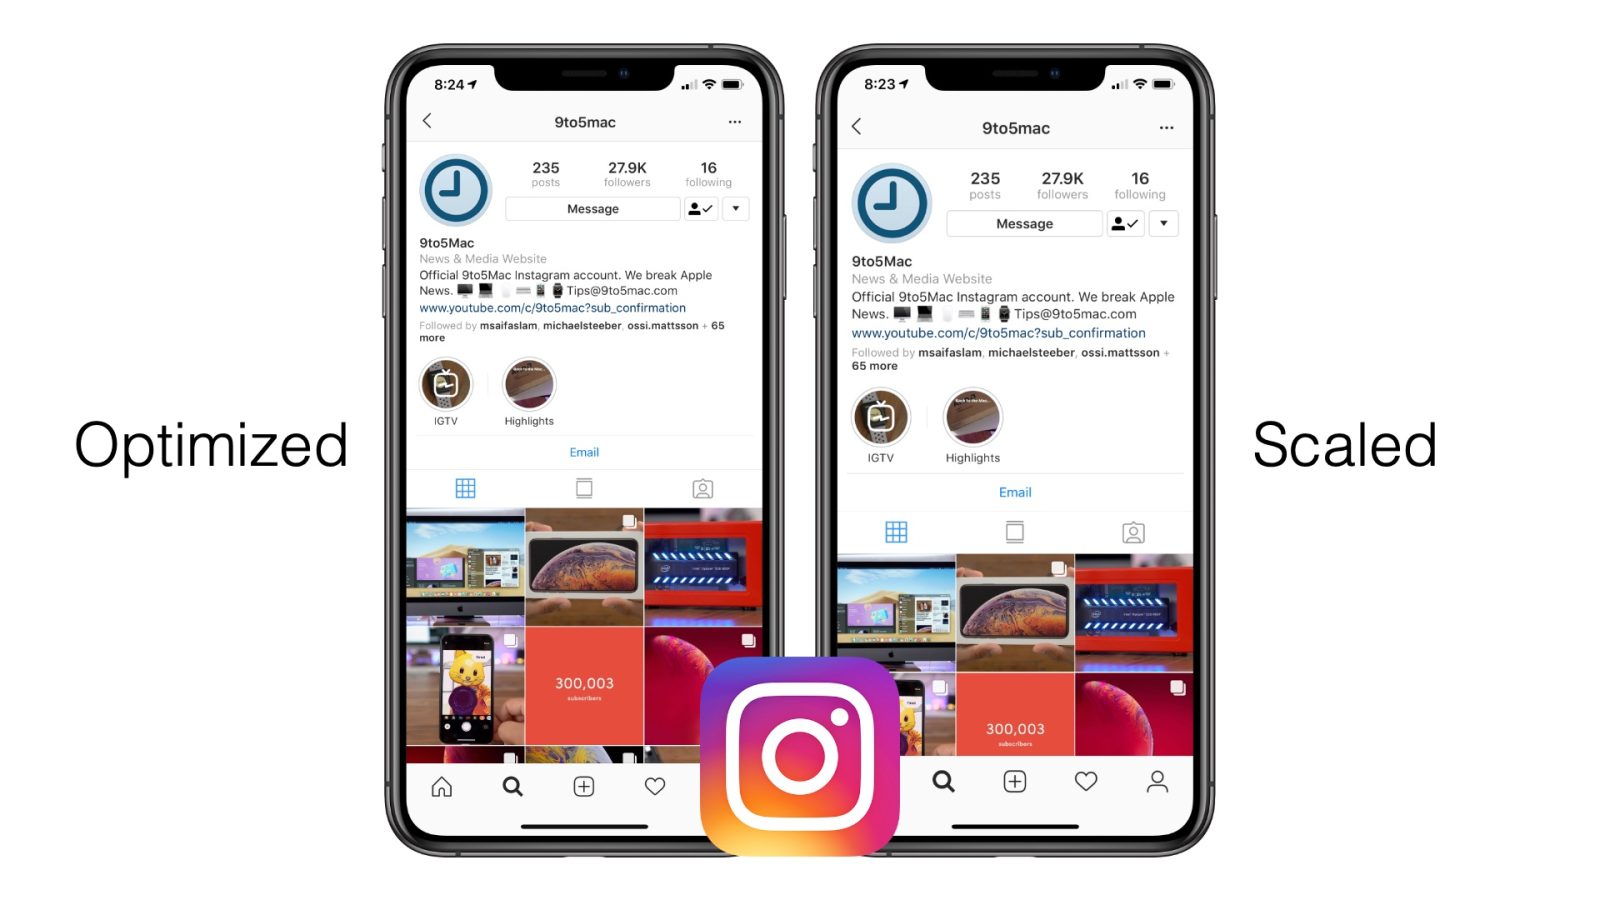 instagram for iphone xr and xs max no longer optimized here s why - instagram follower app far iphone